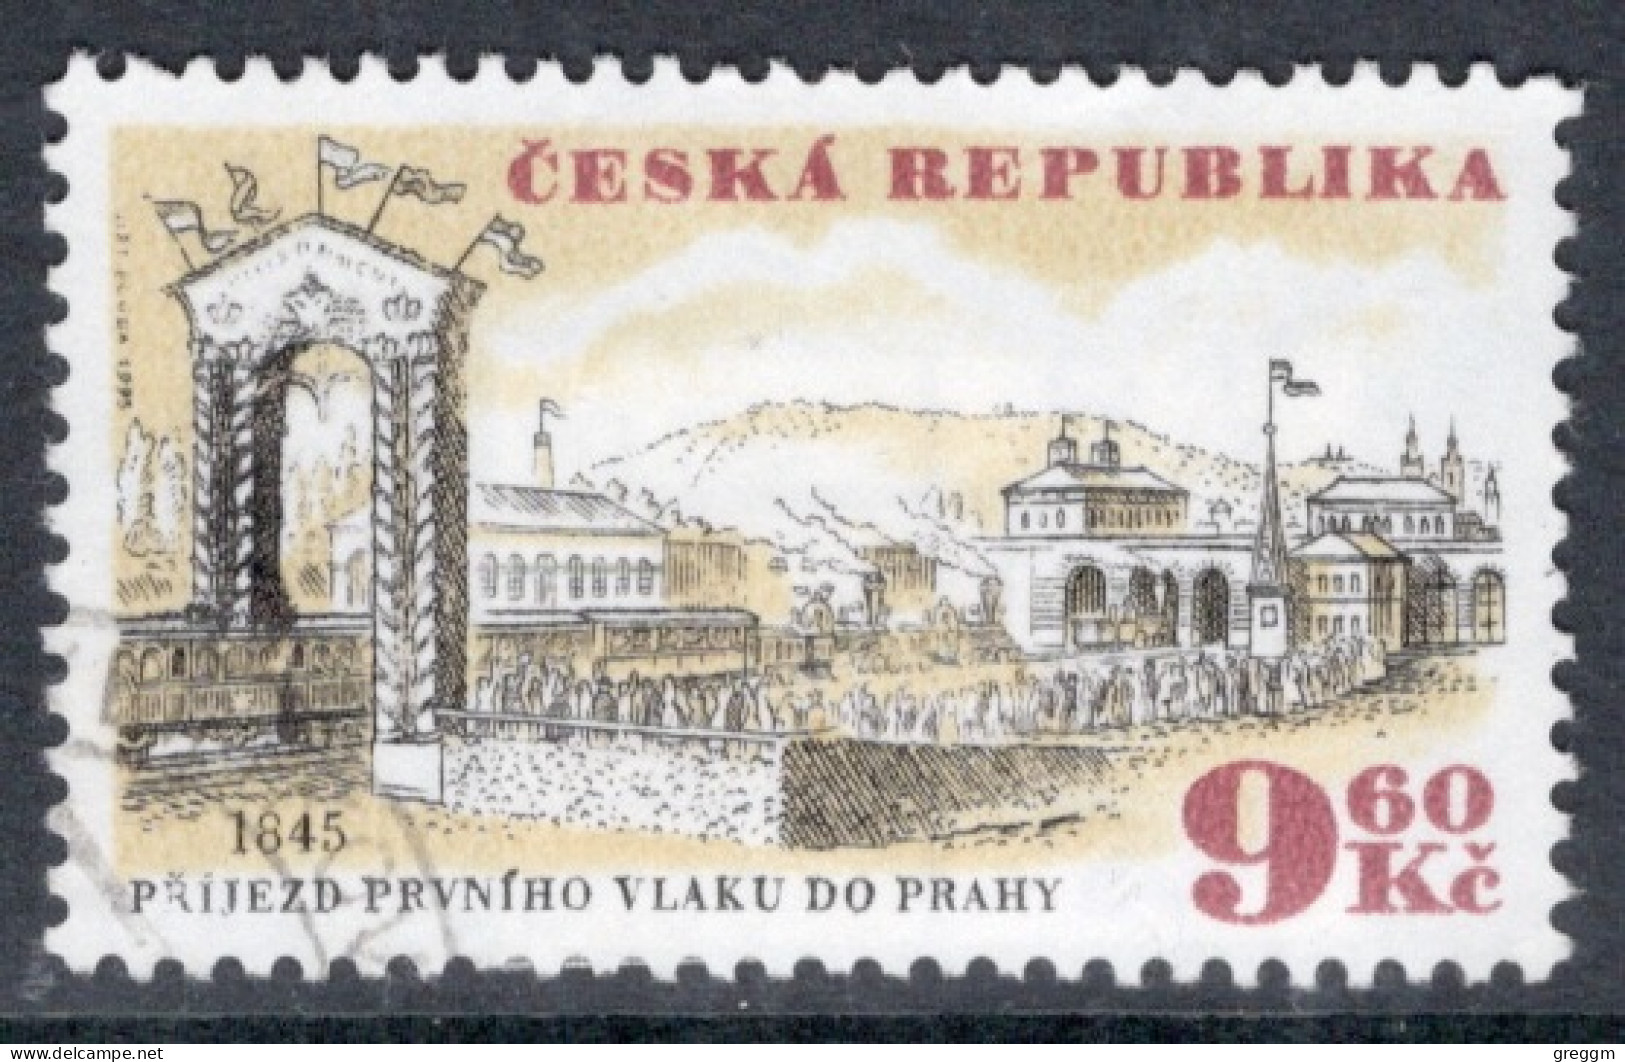 Czech Republic 1995 Single Stamp For The 150th Anniversary Of The Railway Connection Olomouc-Prague In Fine Used - Usati